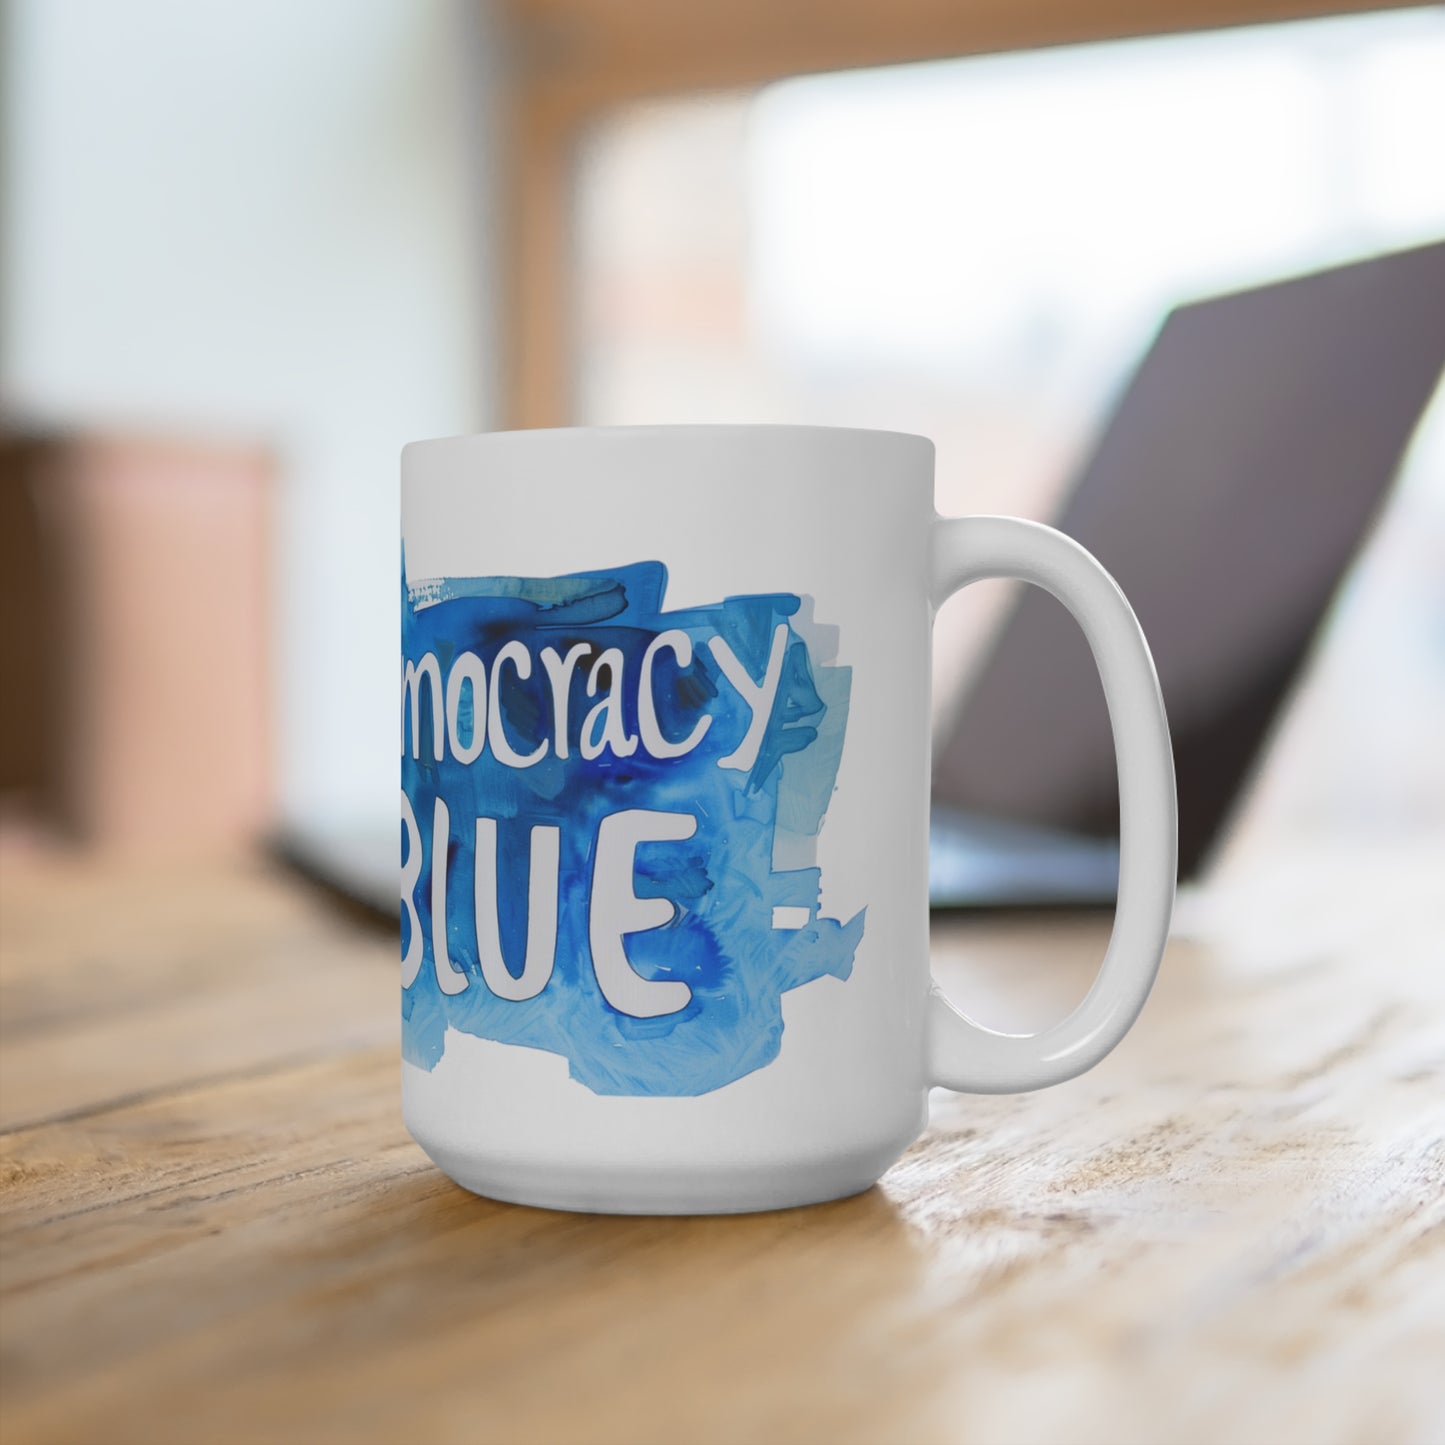 Save Democracy! Vote Blue! Coffee Mug (15oz) Show You Care and Inspire Others to Care too!